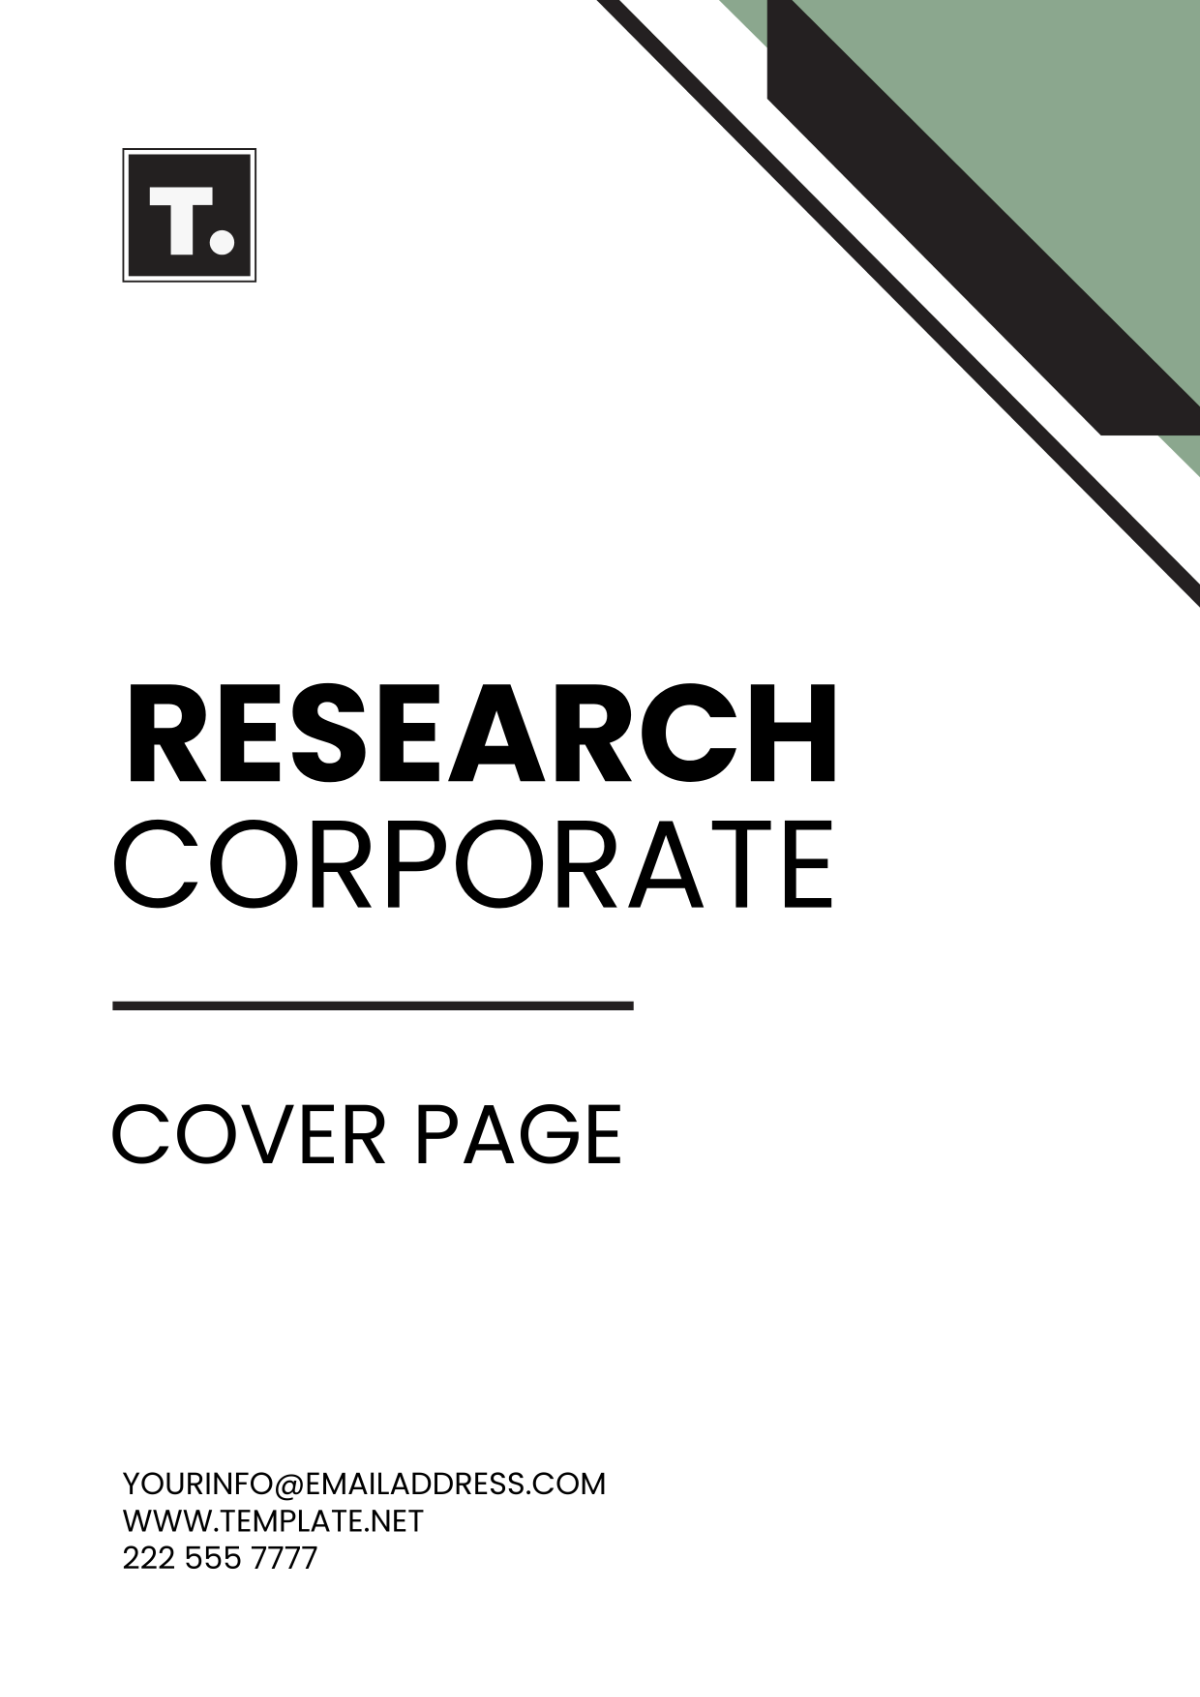 Research Corporate Cover Page Template